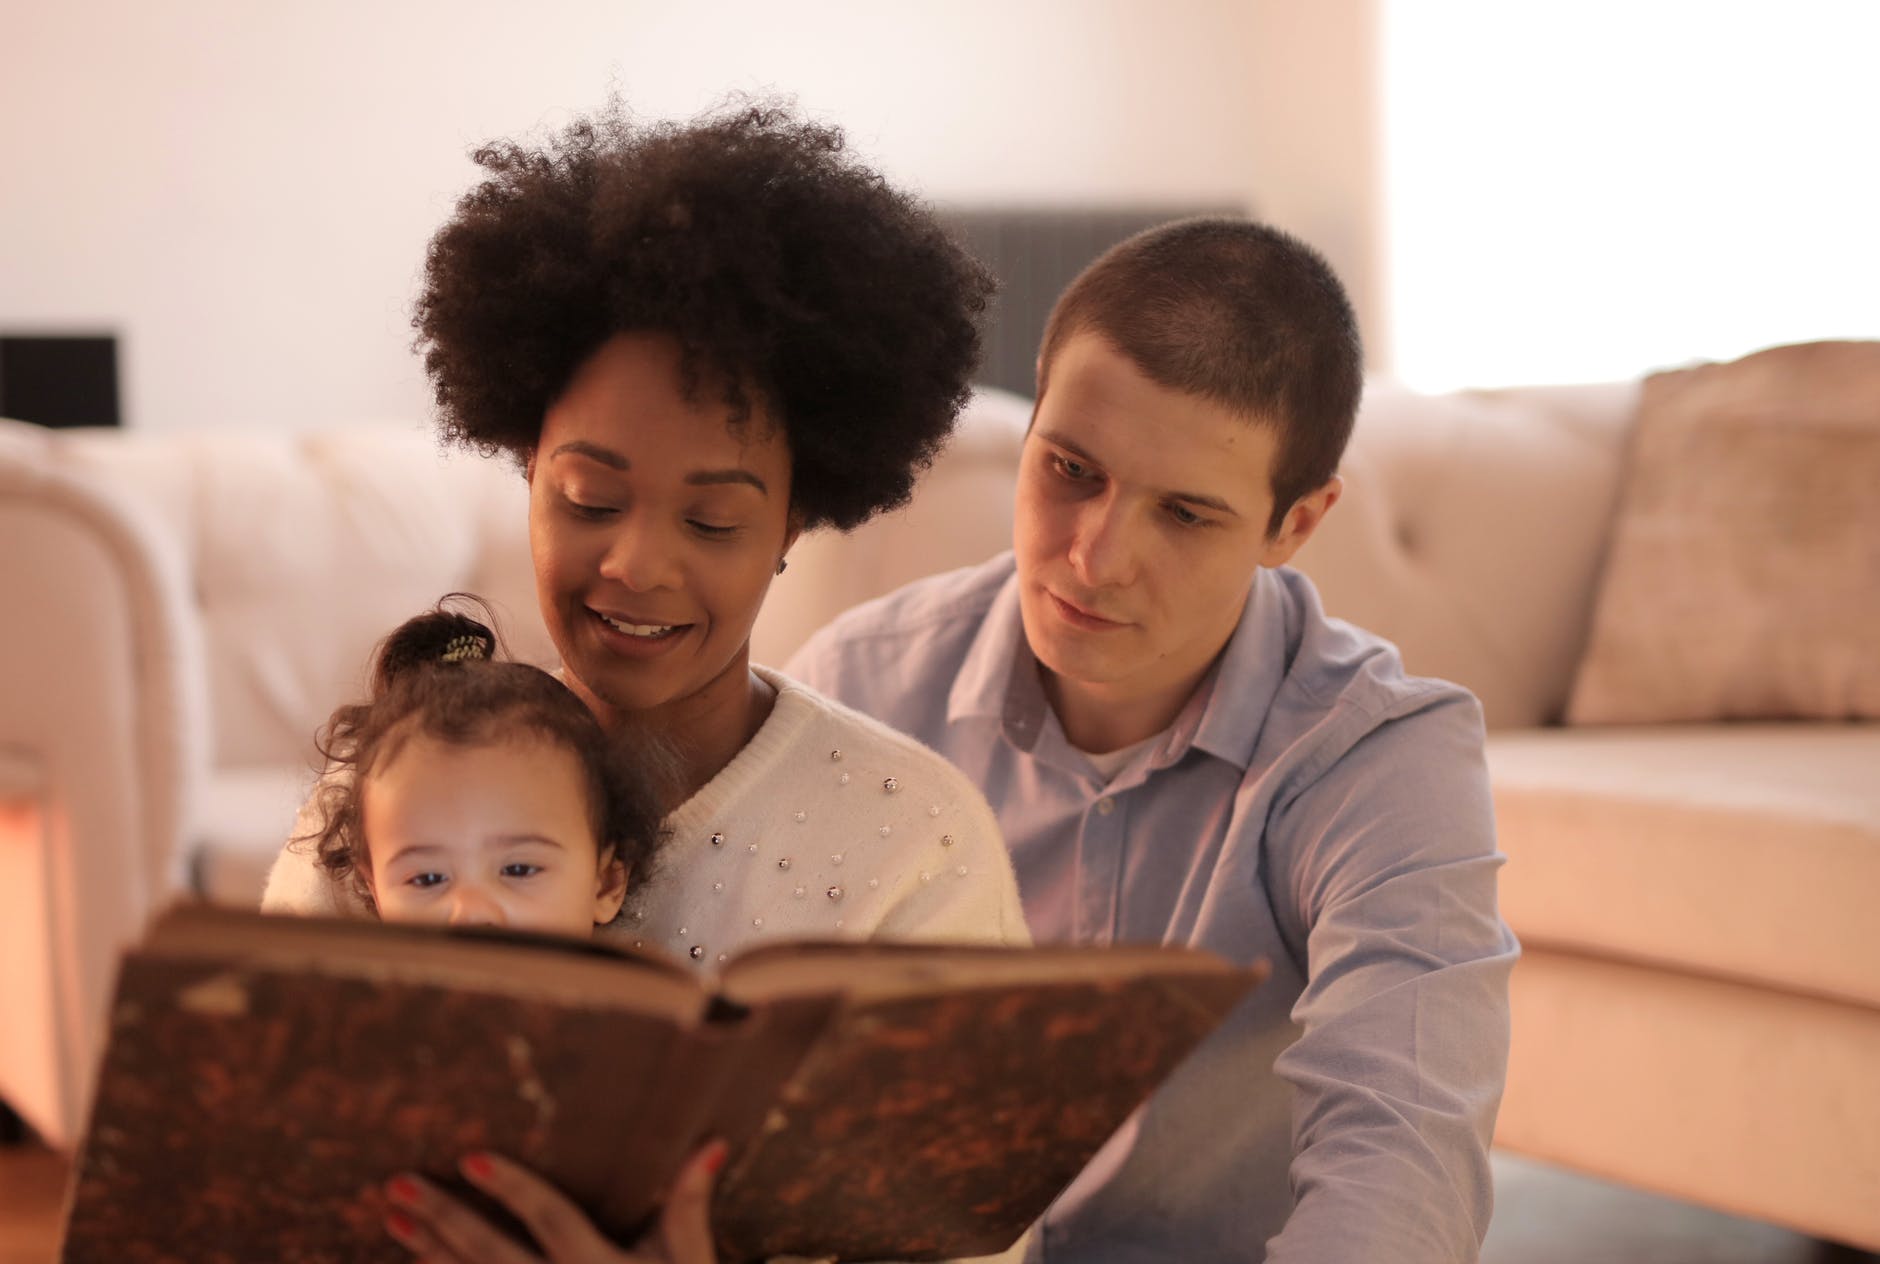 Reading is important family time with preschoolers.